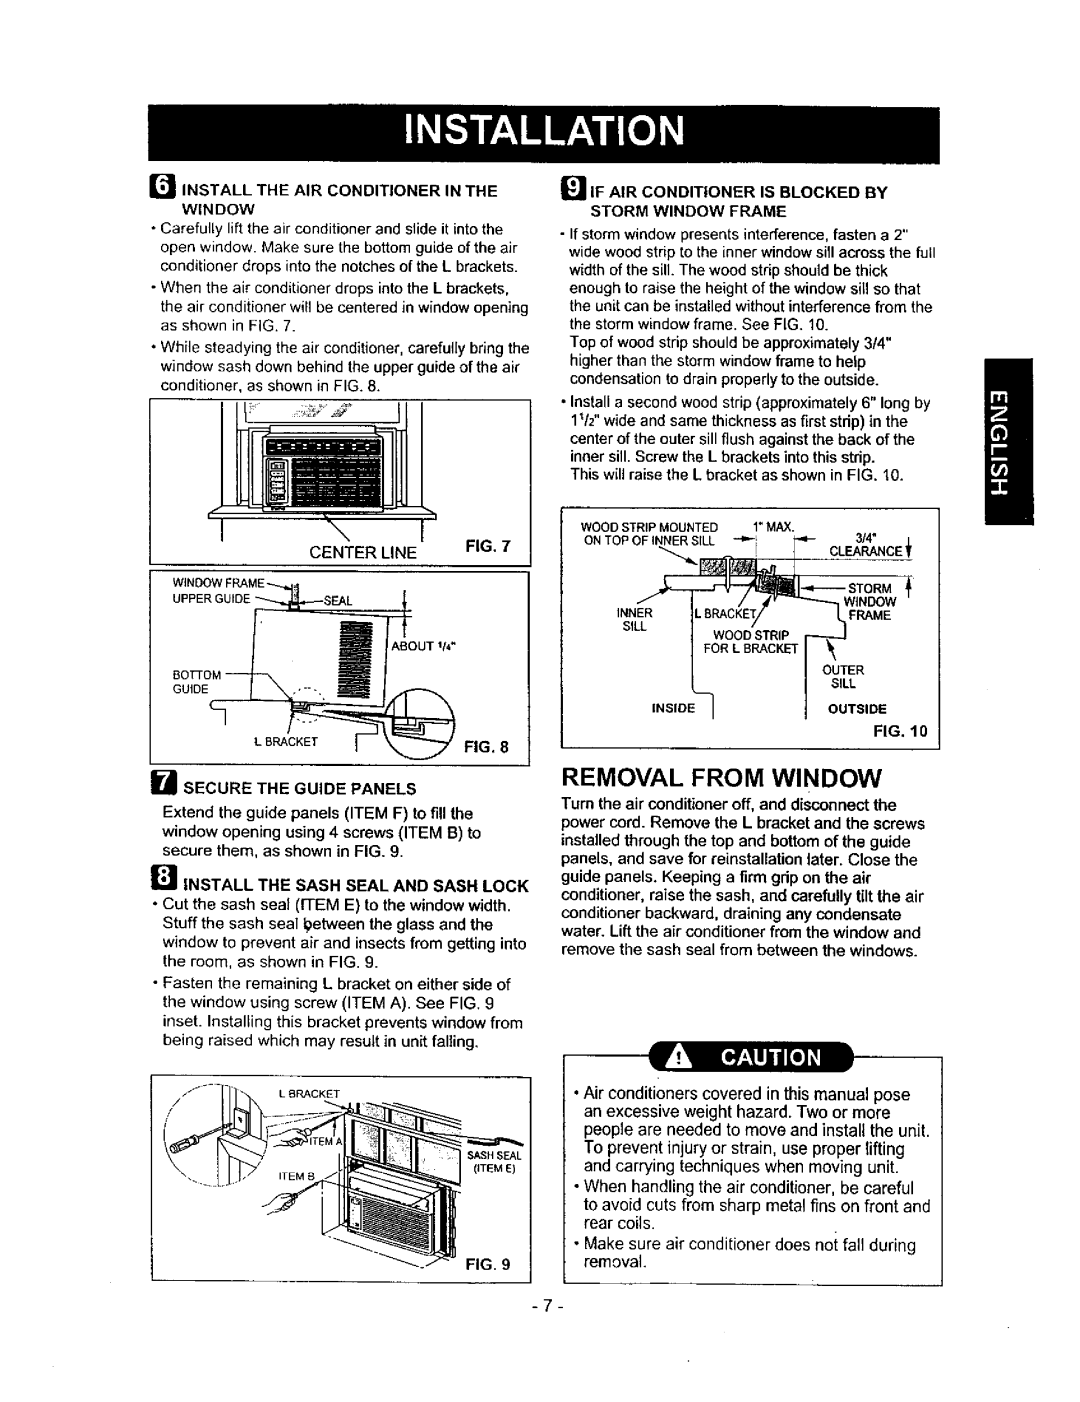 Kenmore 580.71056 owner manual Removal From Window, r INSTALL THE AIR CONDITIONER IN THE, Fig. - Secure The Guide Panels 